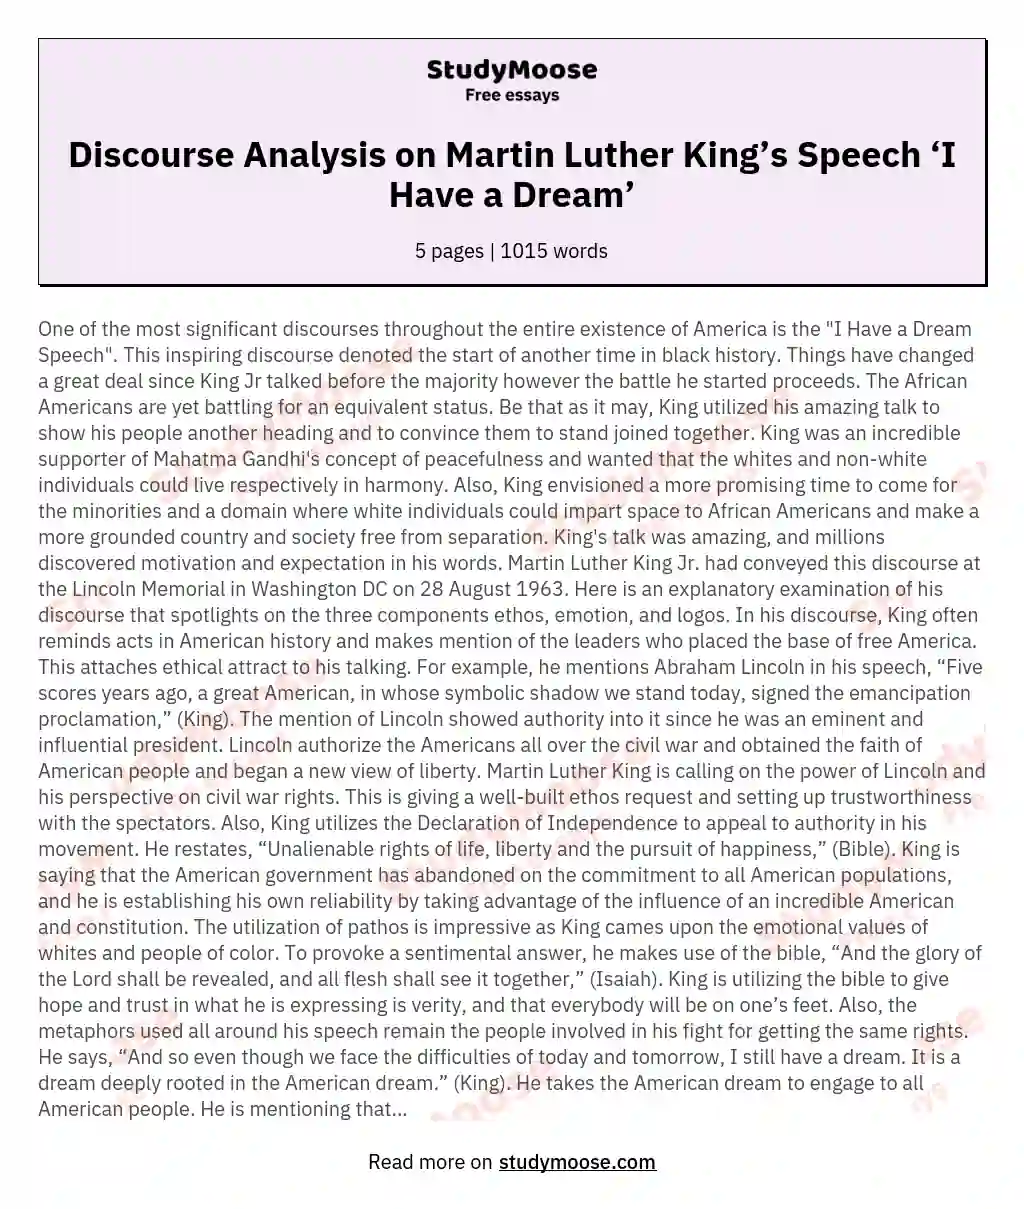 Discourse Analysis on Martin Luther King’s Speech ‘I Have a Dream’